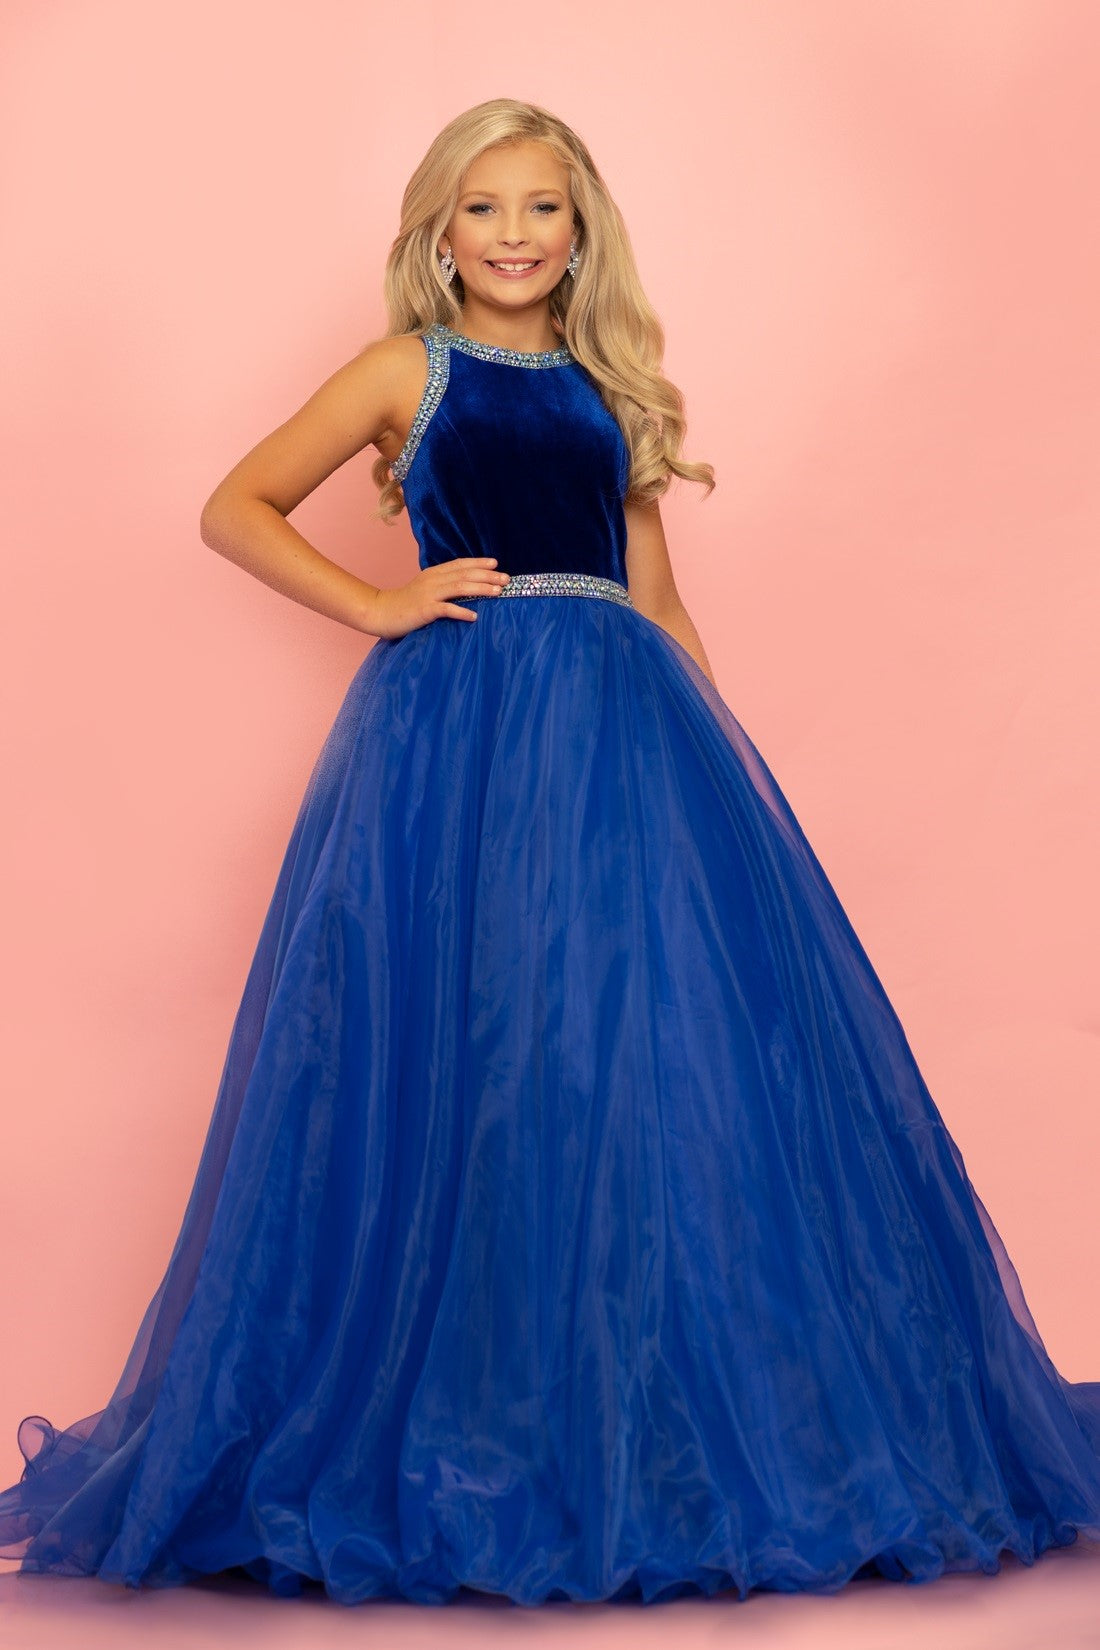 Sugar Kayne C124 by Johnathan Kayne is a stretch satin bodice girl pageant dress. Lush Organza Ballgown skirt. Crystal Embellished waist band and bodice edges. High Neck Gown with sweeping train.  Available Colors: Creamsicle, Royal  Available Size: 2-16